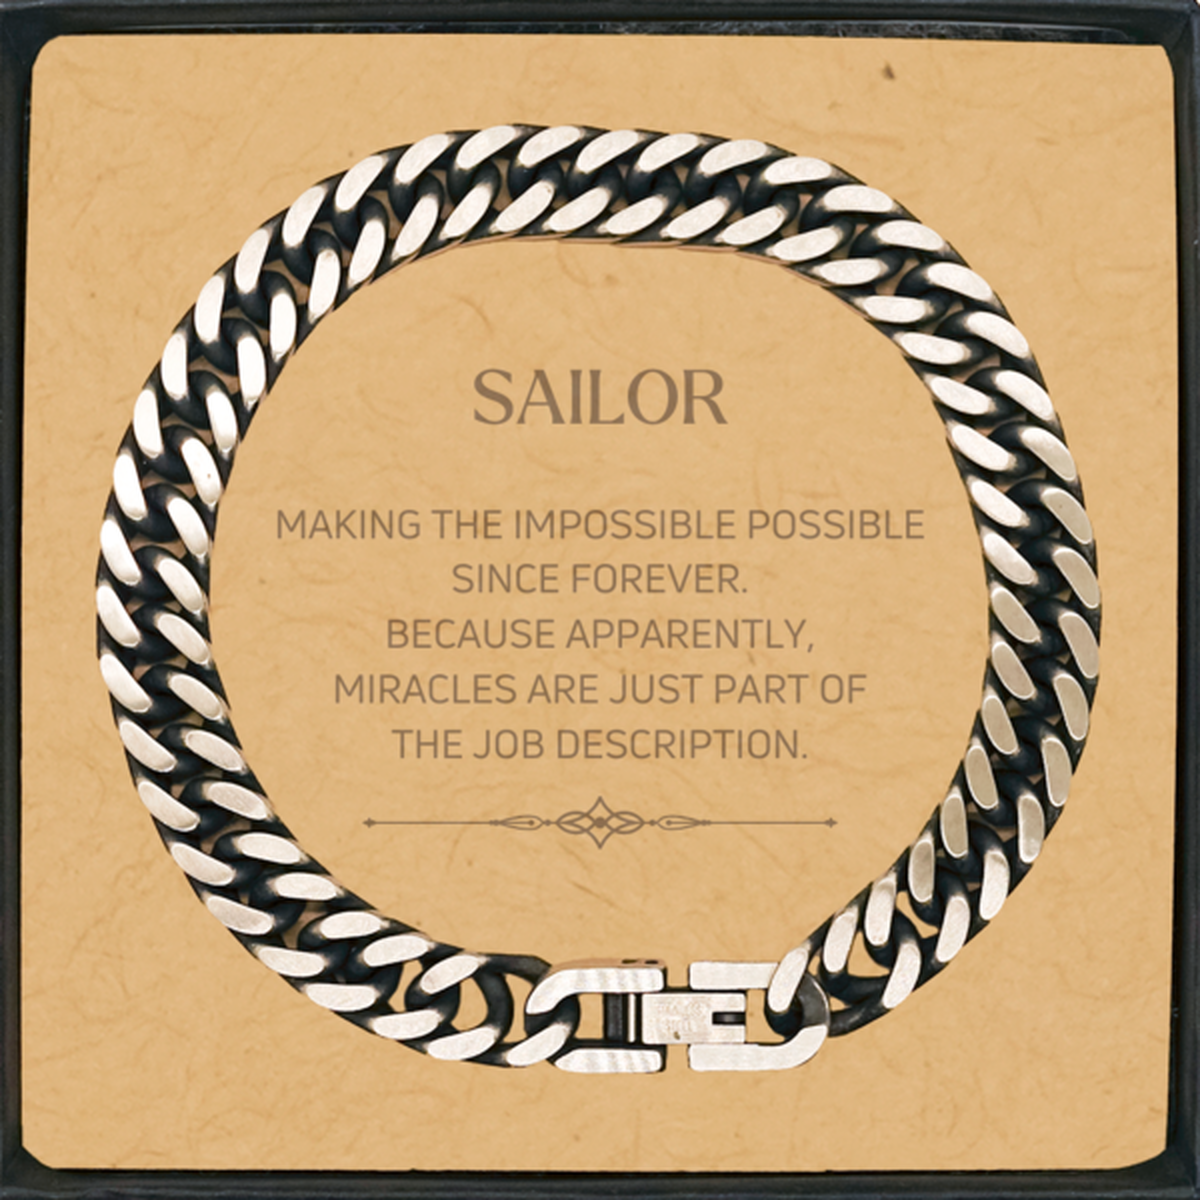 Funny Sailor Gifts, Miracles are just part of the job description, Inspirational Birthday Cuban Link Chain Bracelet For Sailor, Men, Women, Coworkers, Friends, Boss